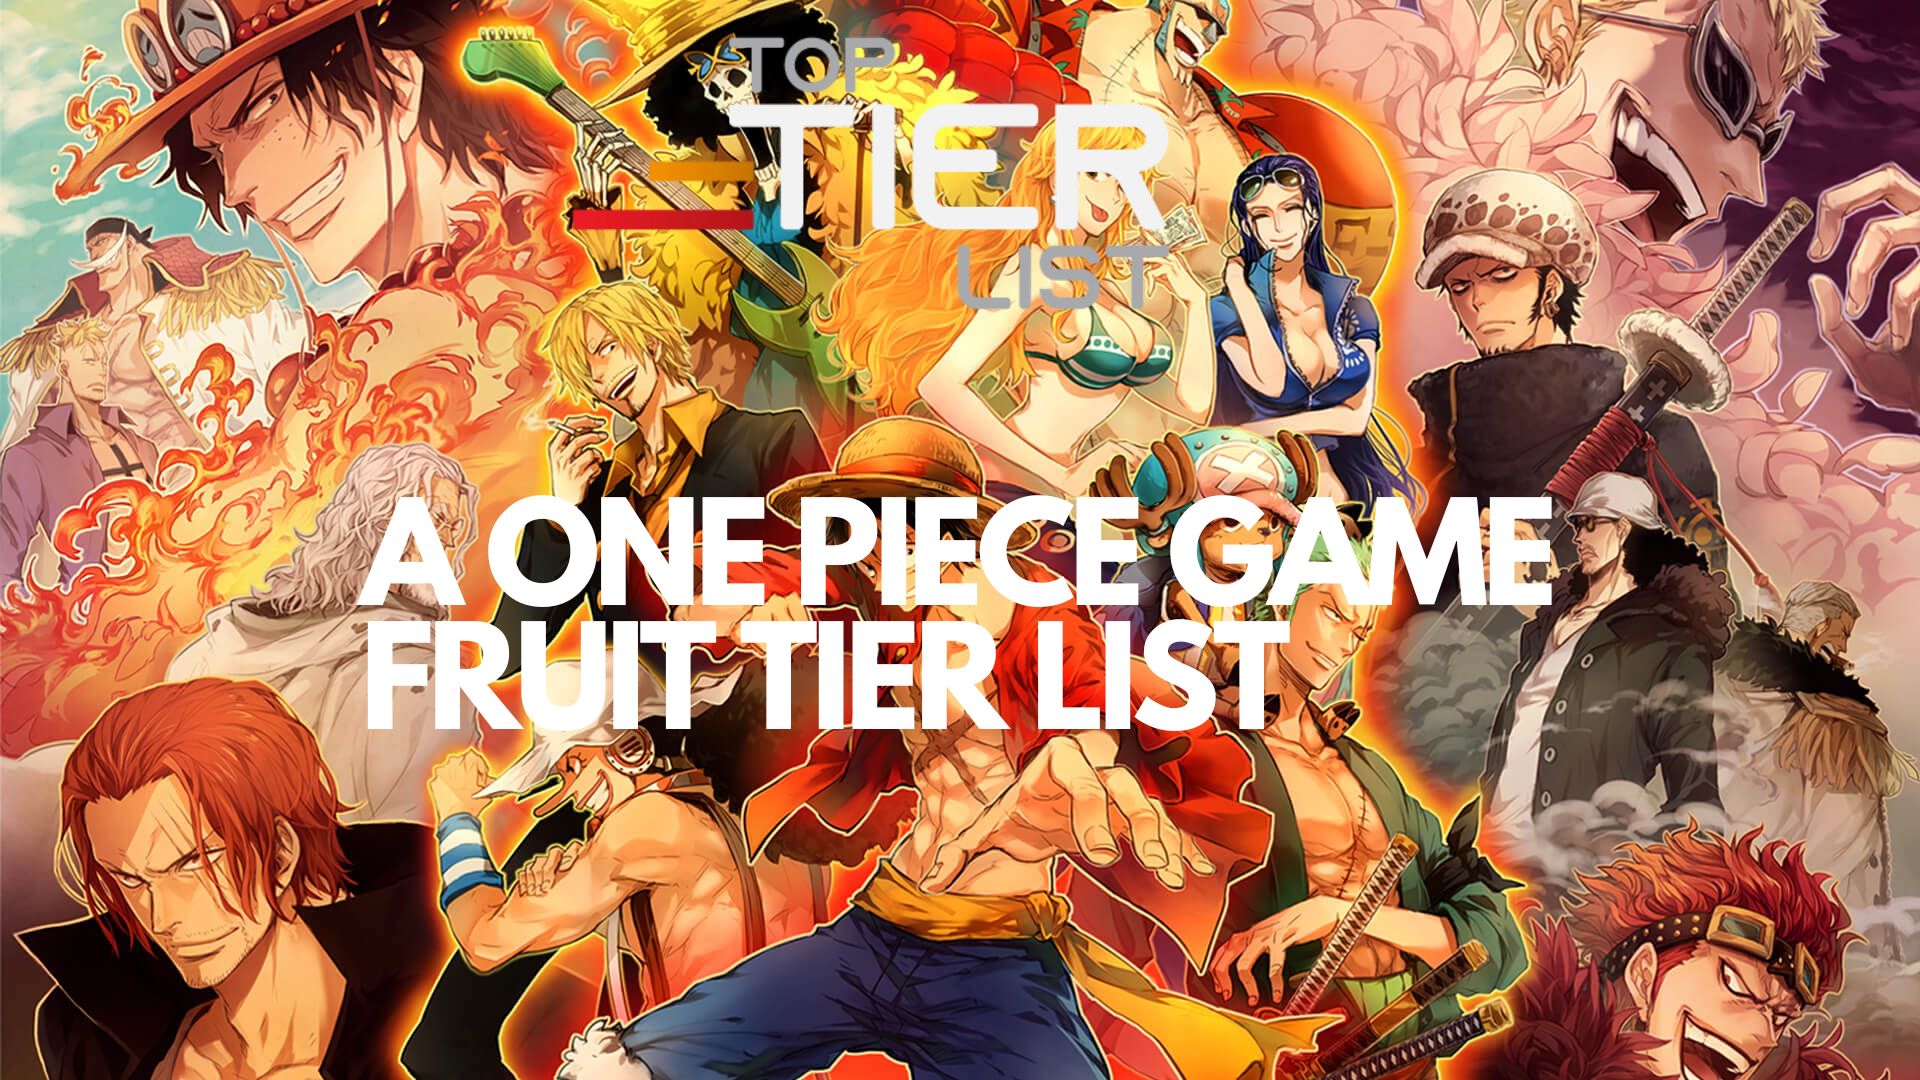 My tier list of fruits in pvp. Tell your opinions. (in my exp and